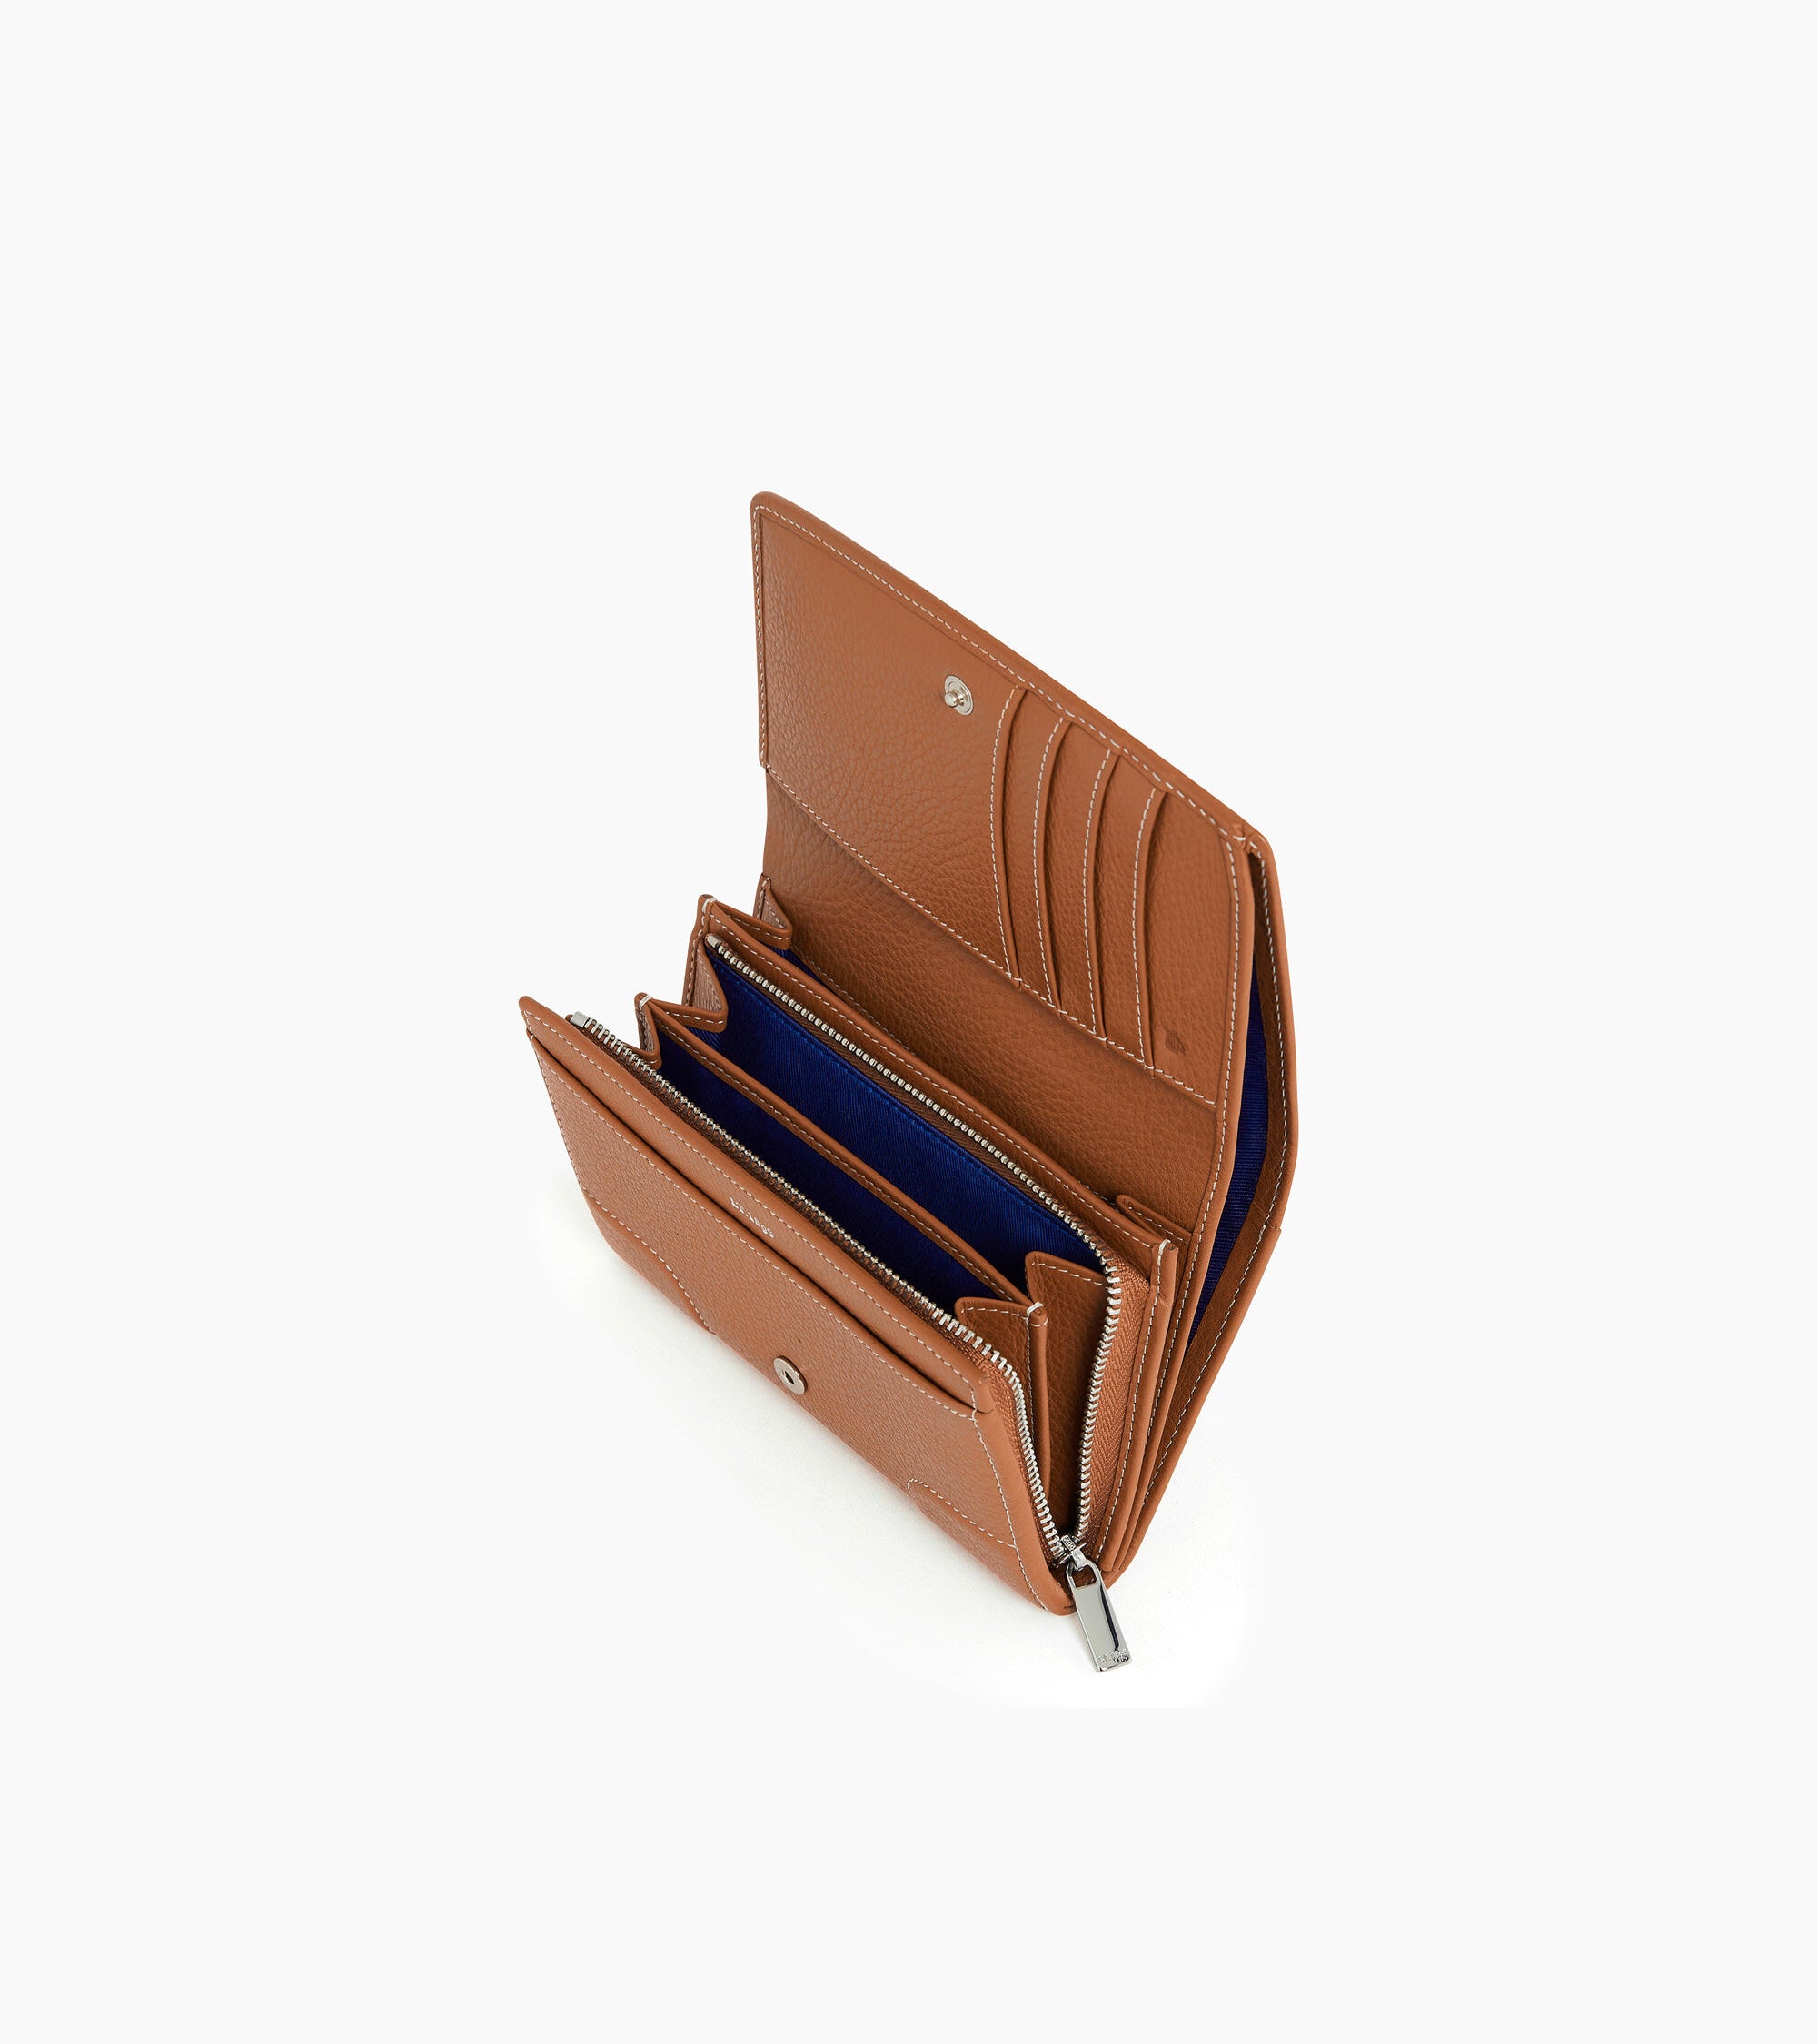 Romy coin case with flap closure in grained leather